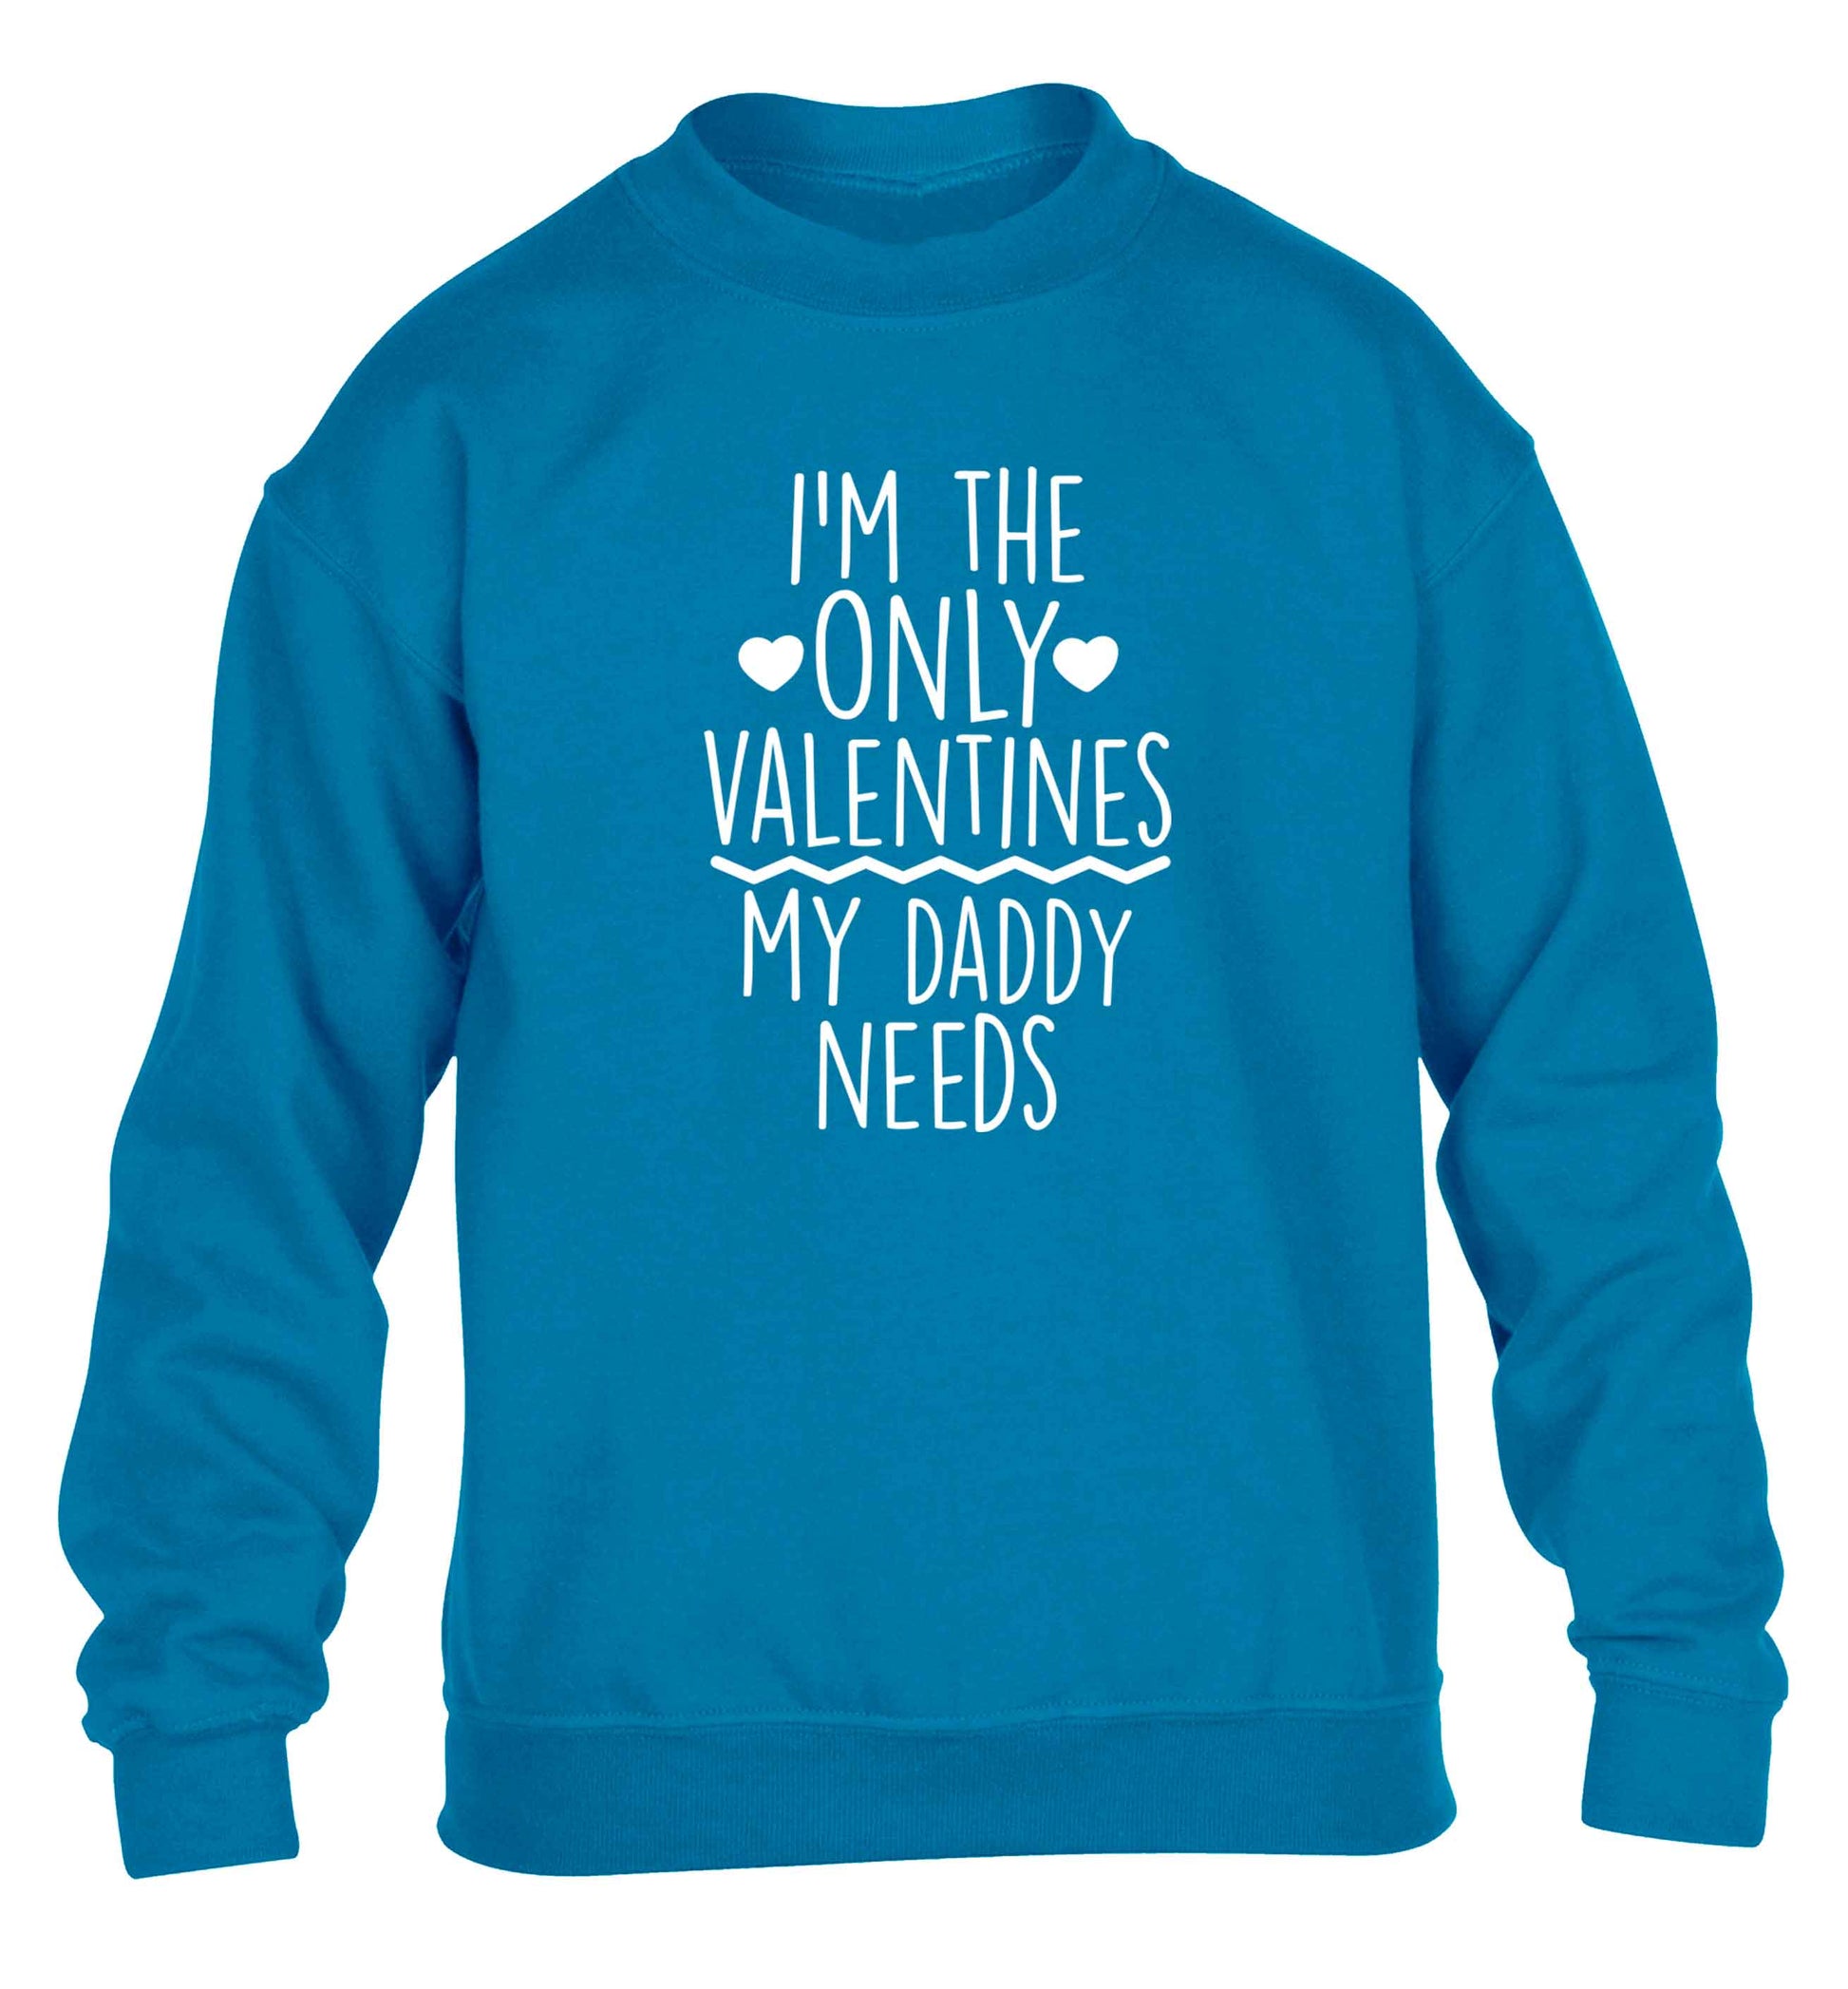 I'm the only valentines my daddy needs children's blue sweater 12-13 Years